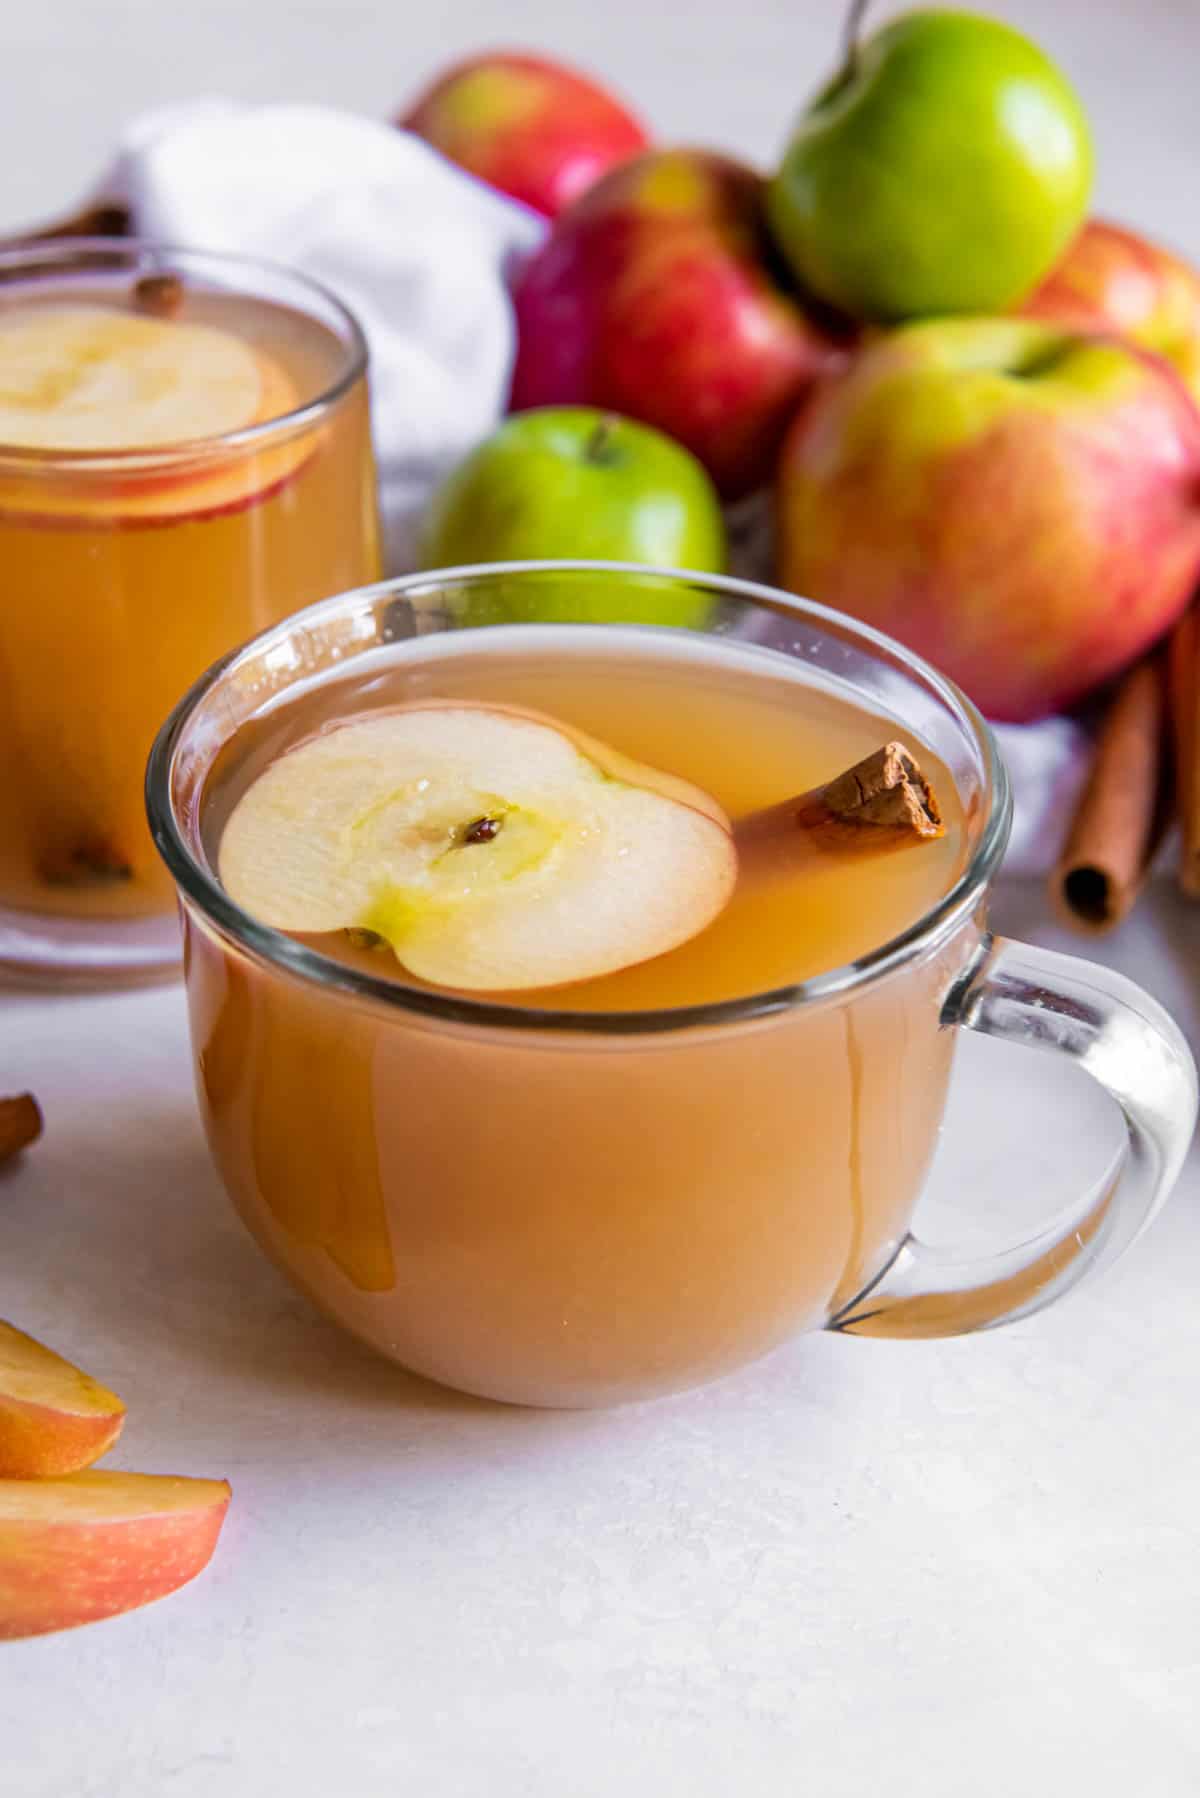 Two glasses of apple cider sitting on a white countertop. A slice of apple and a cinnamon stick are in the cider as a garnish.